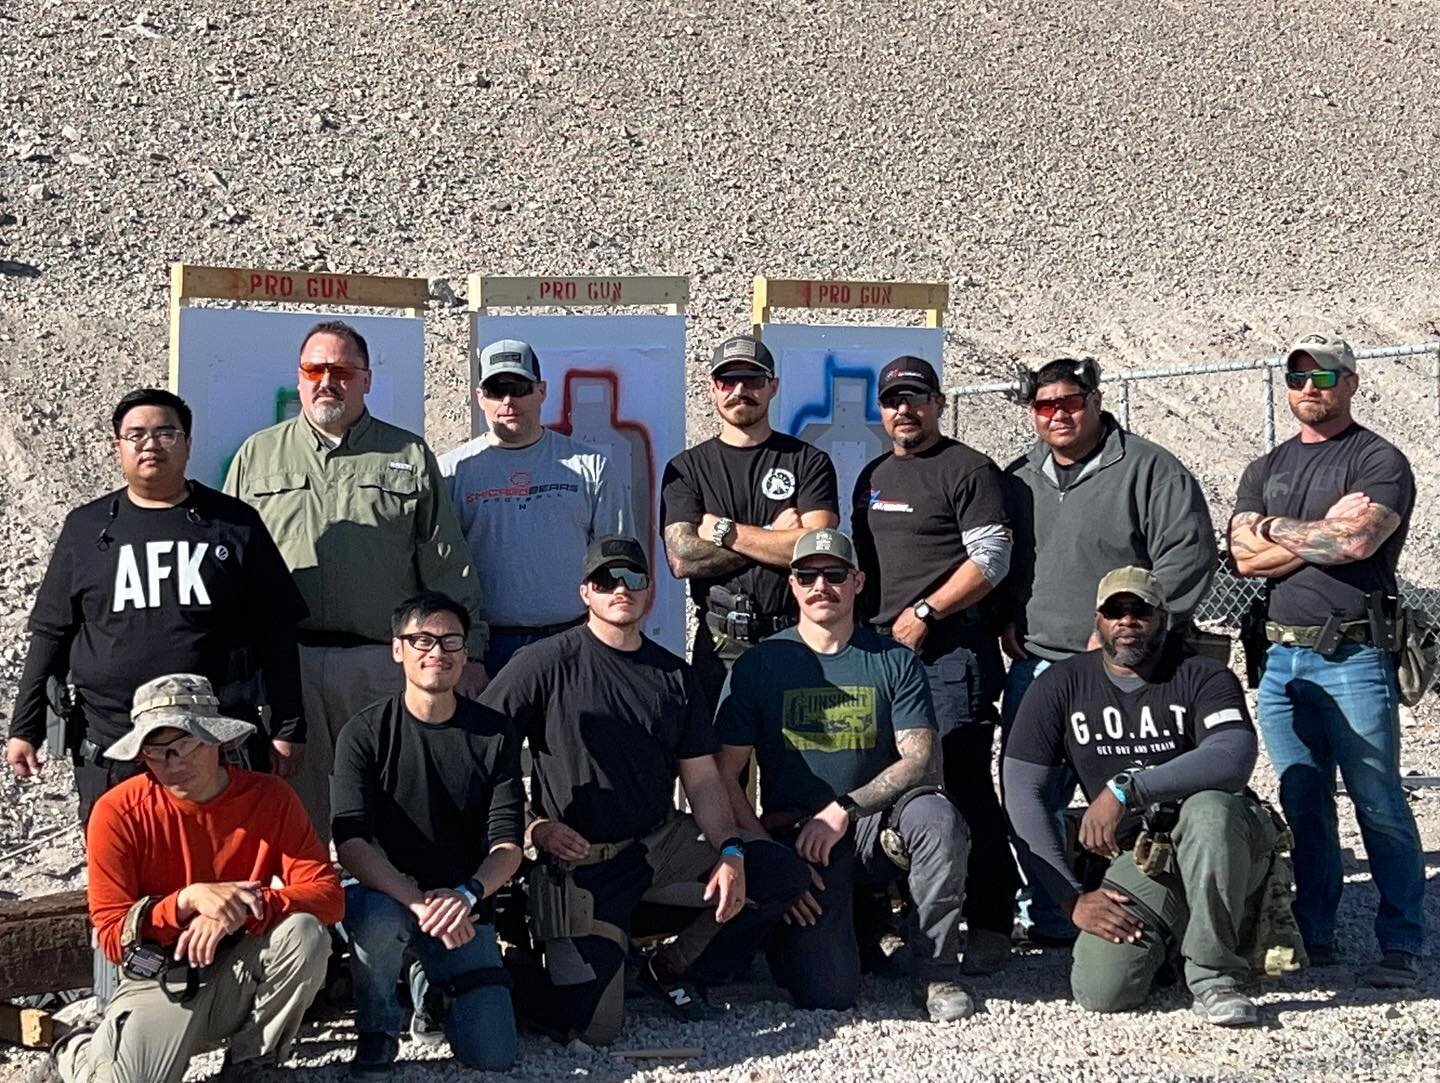 Great couple days in Las Vegas for the last class of the year. Congrats to the @liveagonic top shot too. See y&rsquo;all in March. 
_________

@leupoldoptics @actiontarget #baersolutions #getoutandtrain #lasvegas